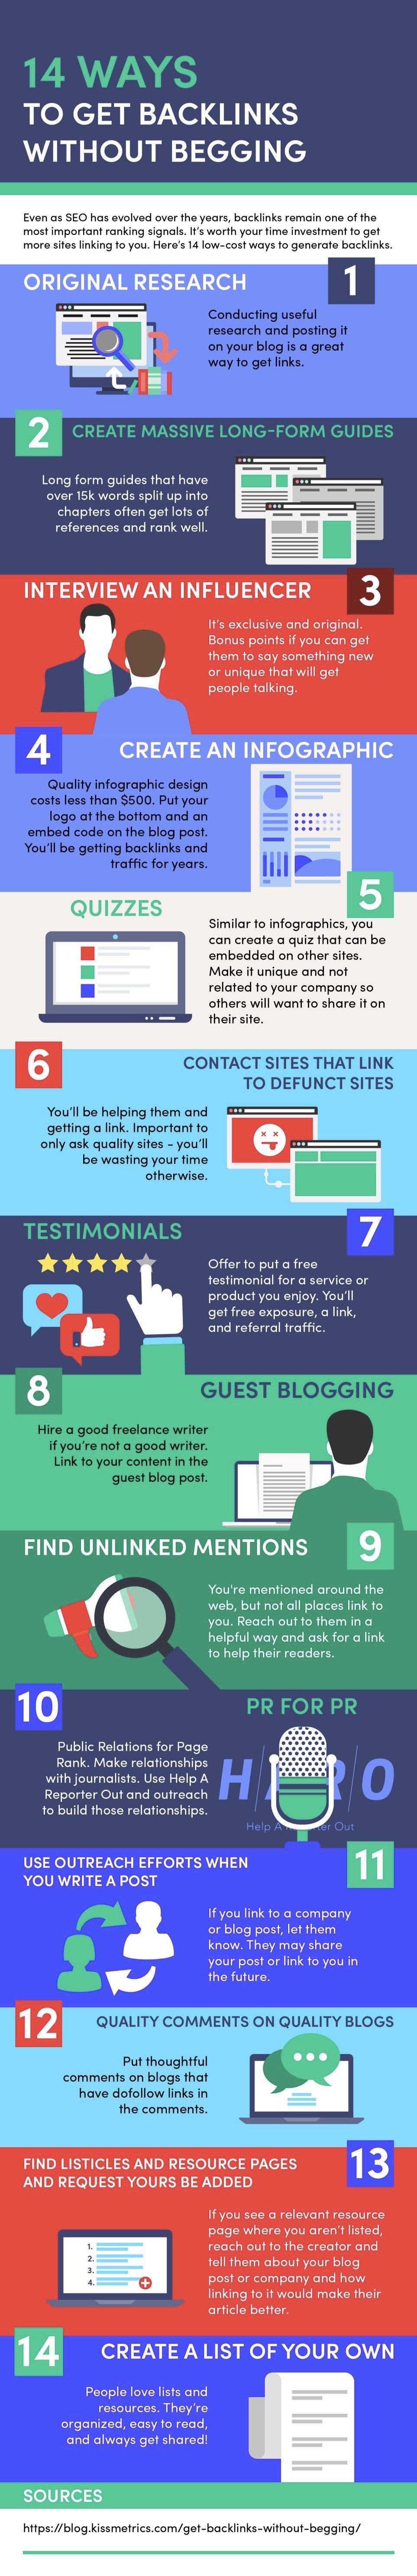 14 ways to get backlinks without begging infographic